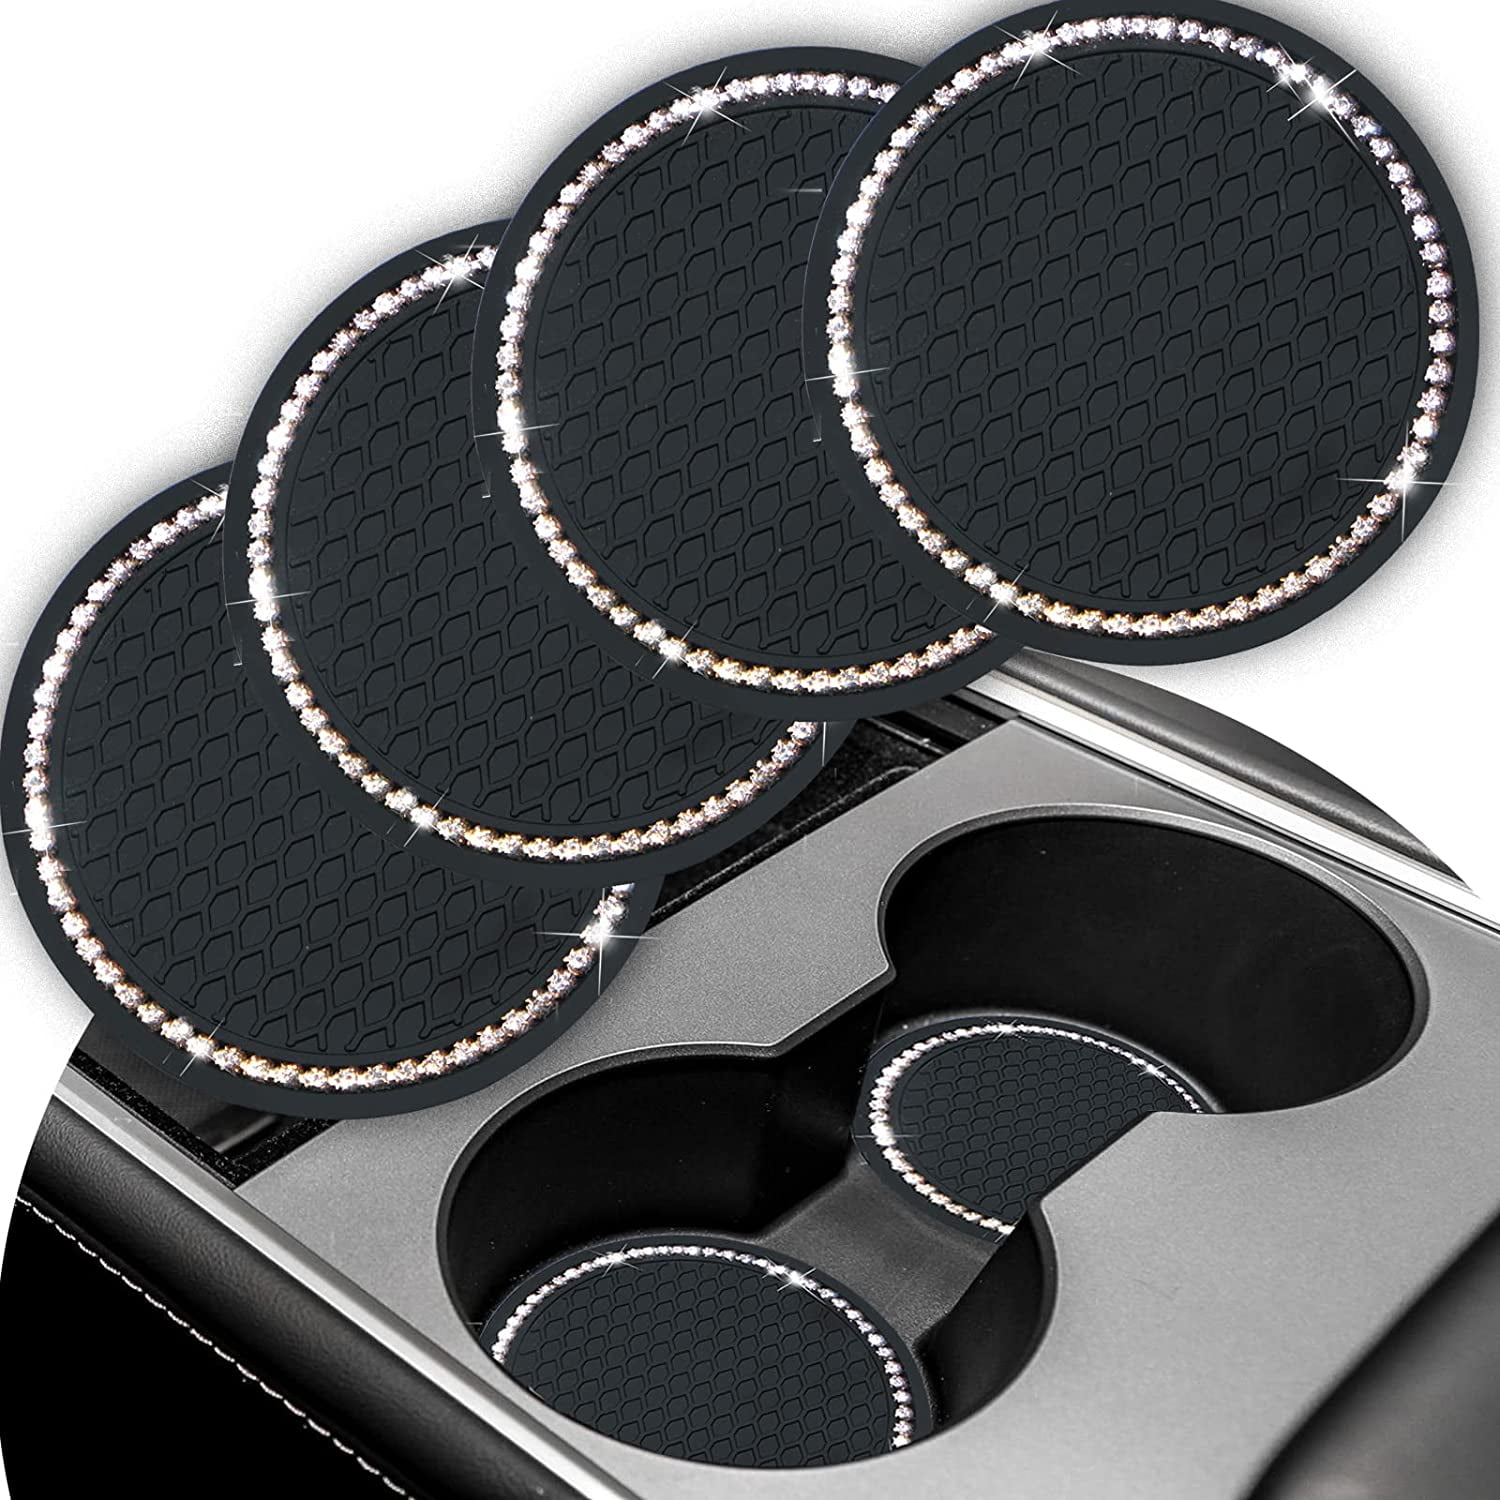 2 Pcs Pvc Waterproof Car Cup Holder Coasters Anti Slip Cup Mats Universal Cup  Holder Insert Coaster Car Interior Accessories - Drinks Holders - AliExpress